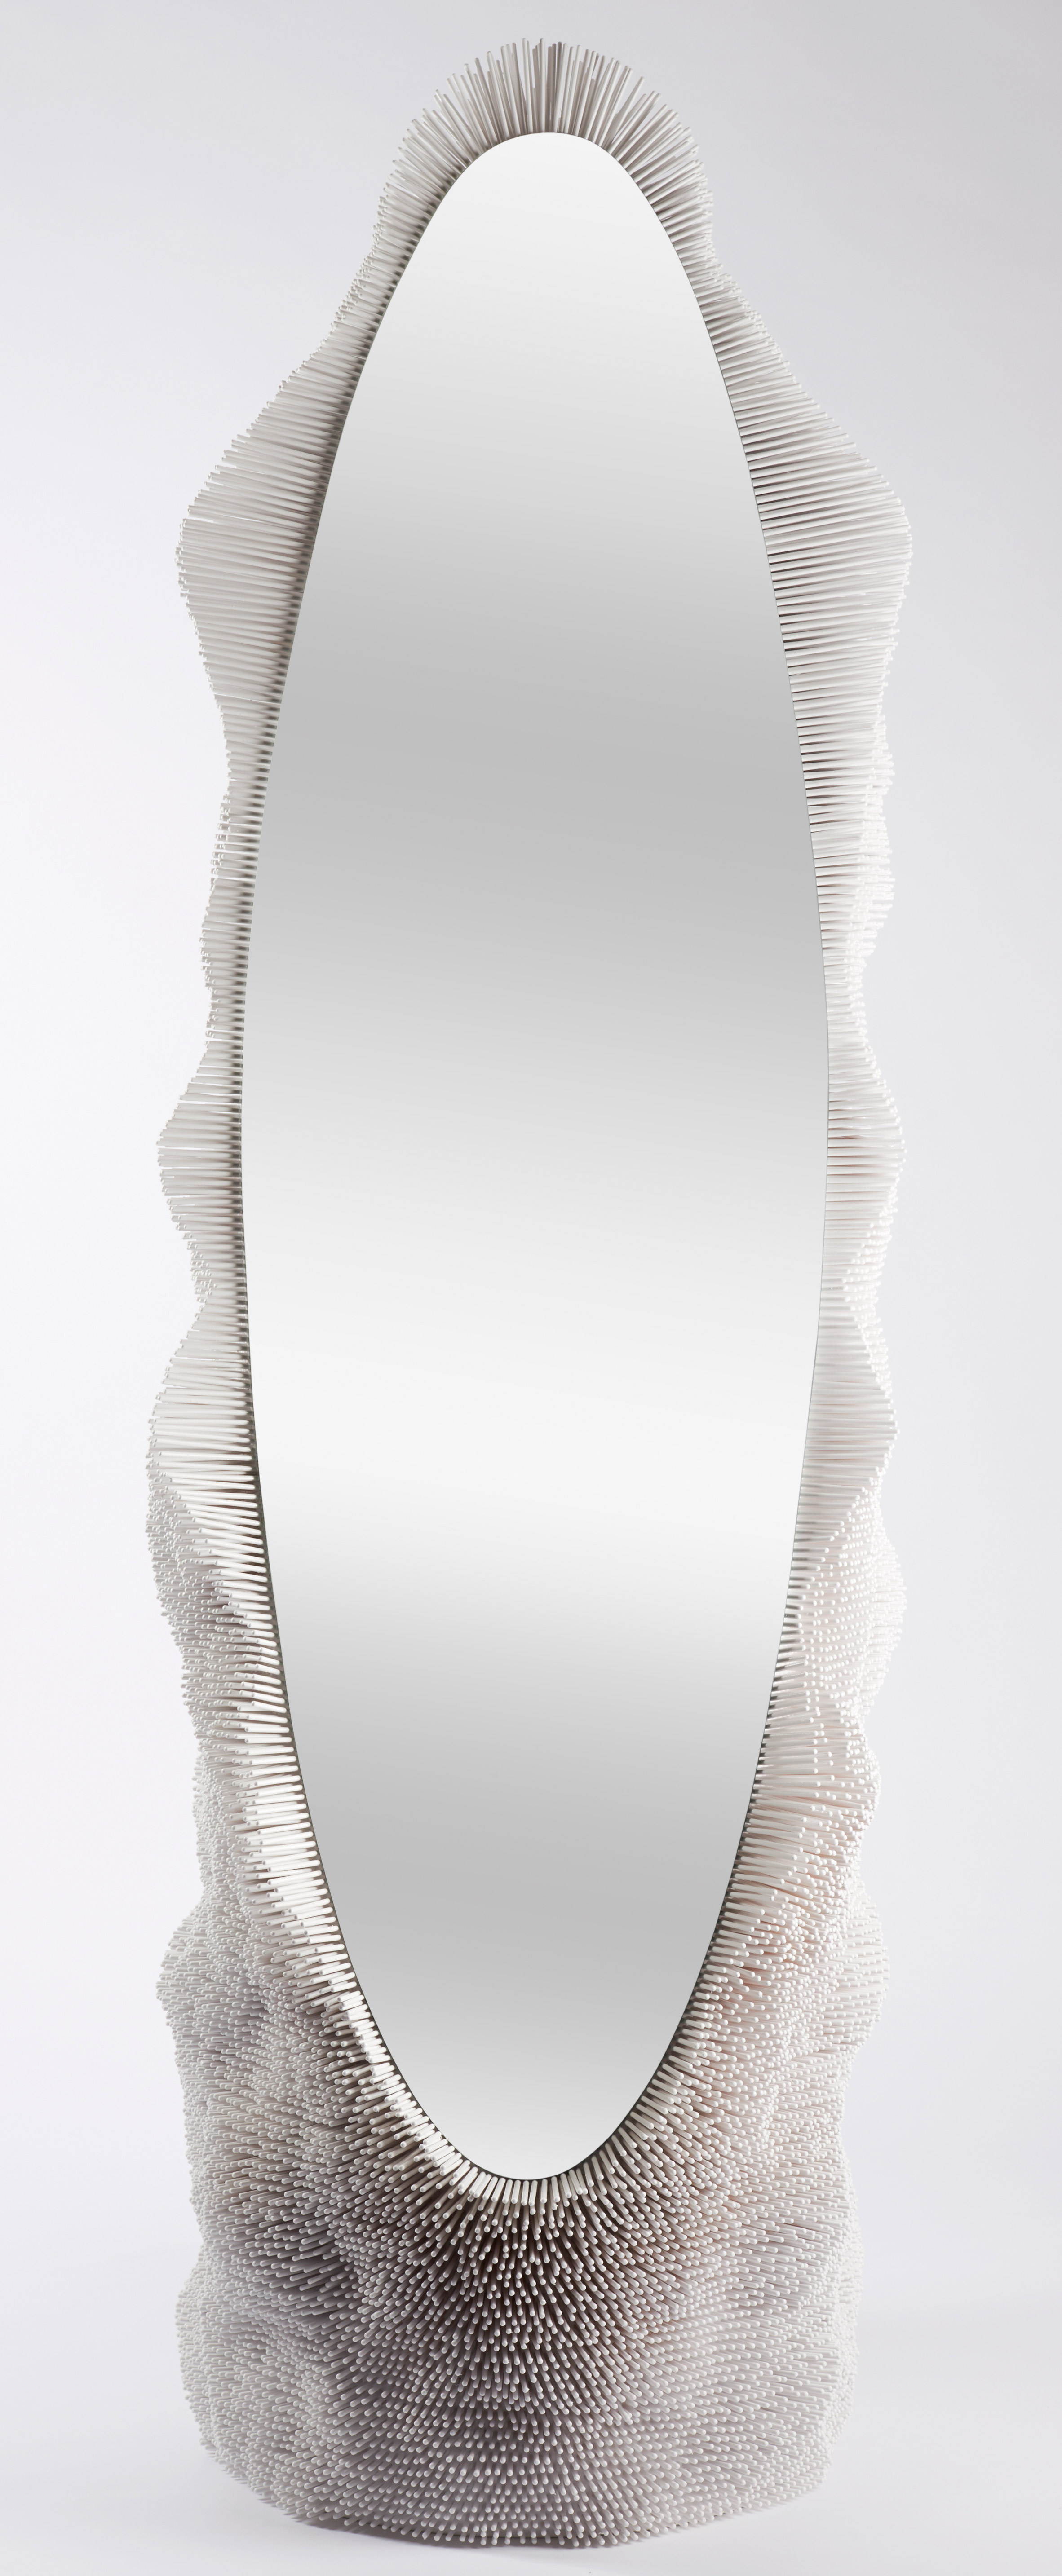 Pia Maria Raeder beech reed furniture for Galerie BSL